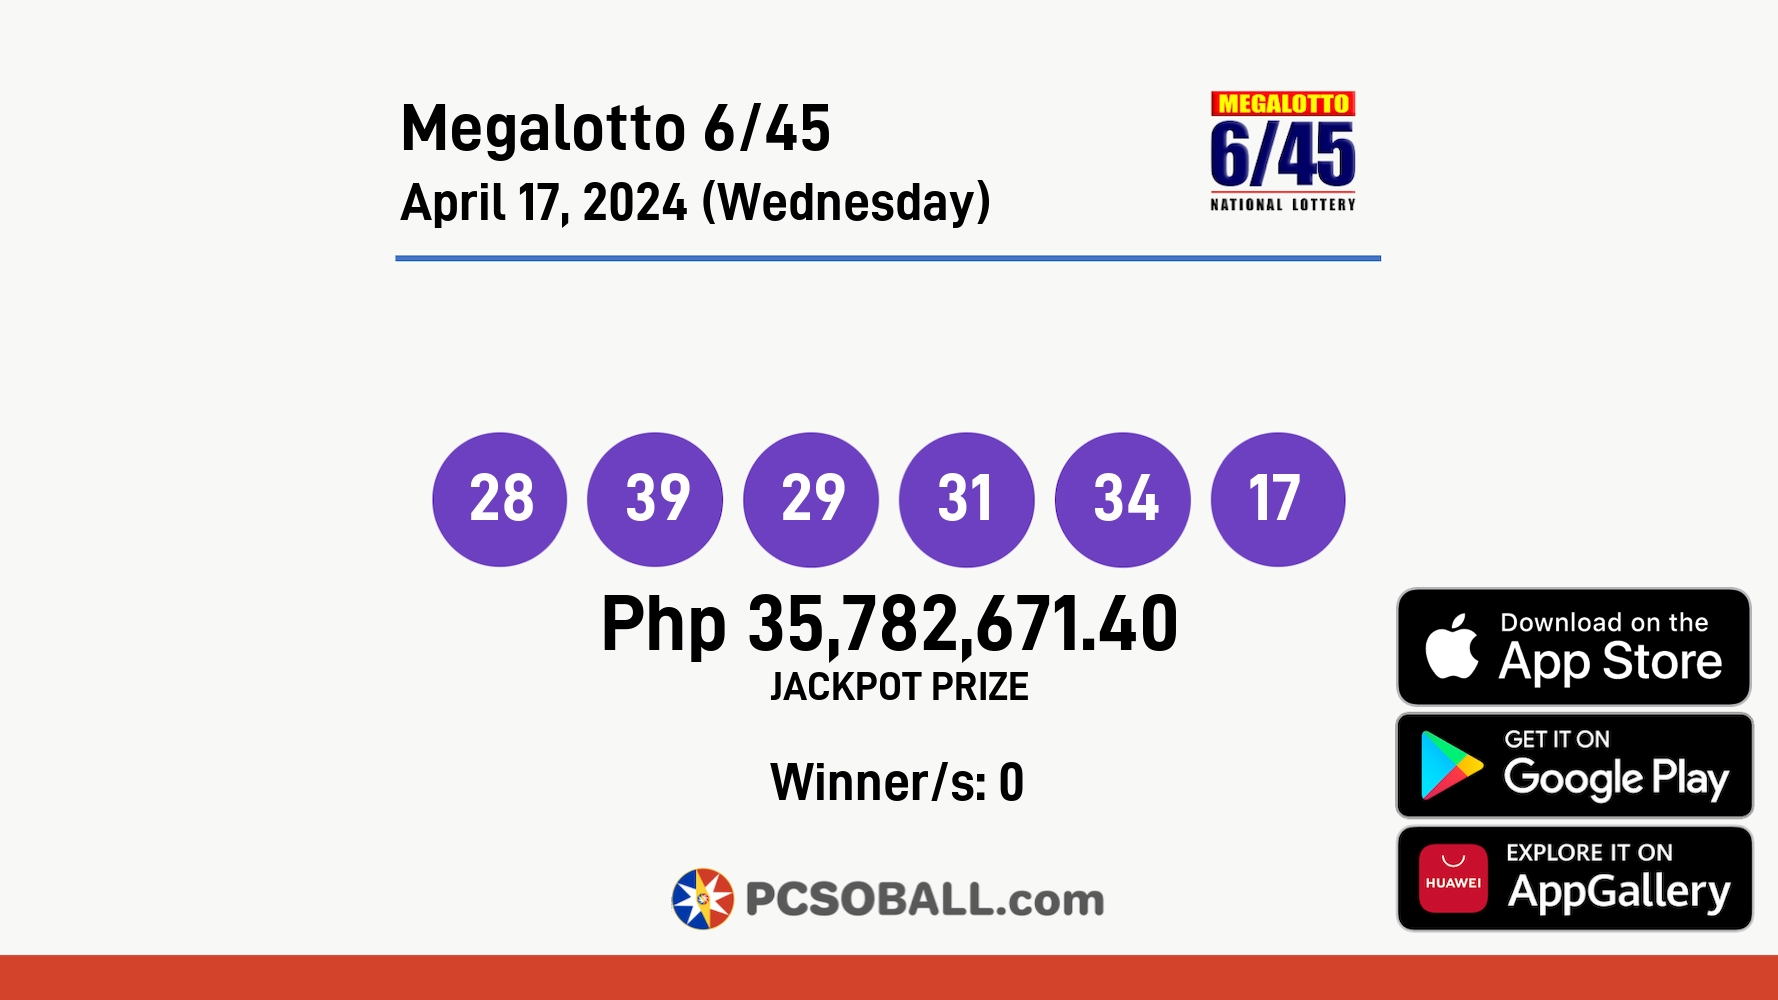 Megalotto 6/45 April 17, 2024 (Wednesday) Result